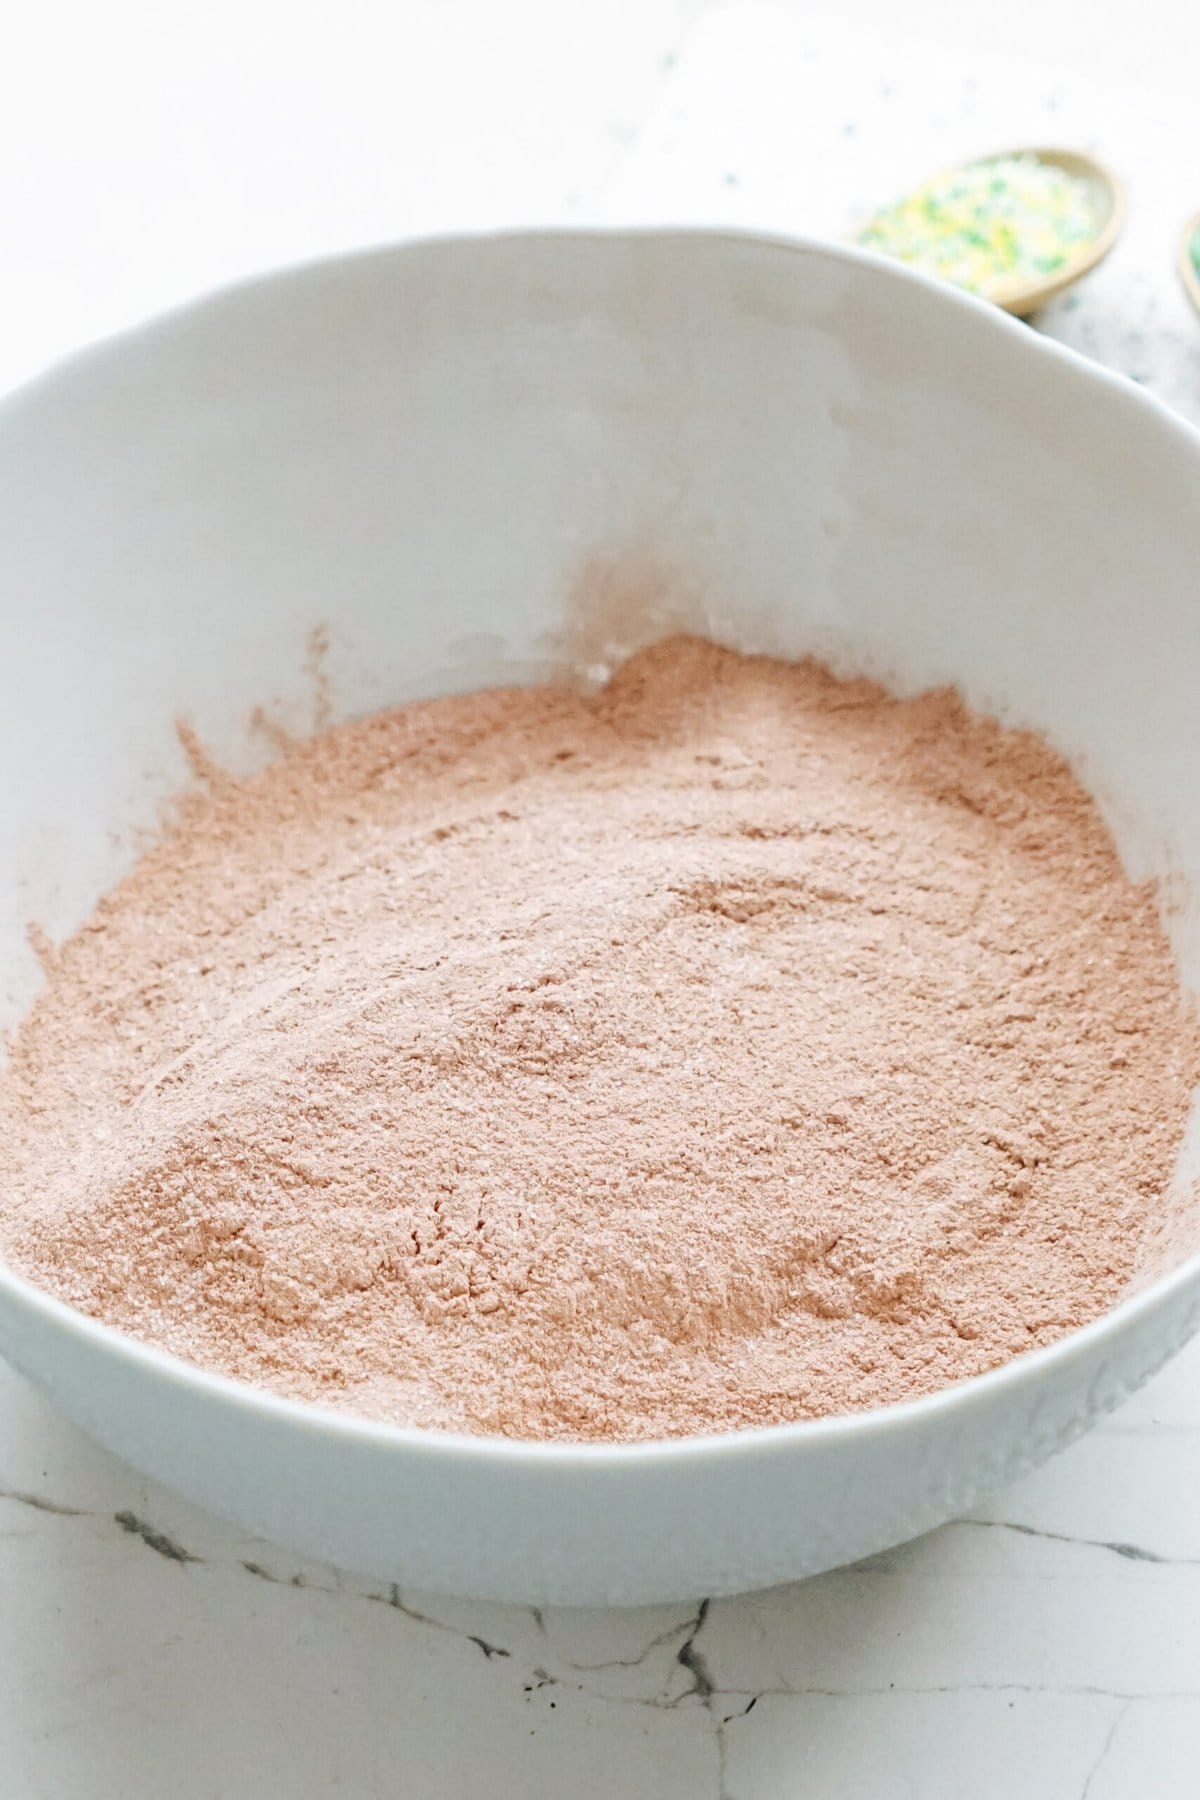 dry cake mix in a white mixing bowl